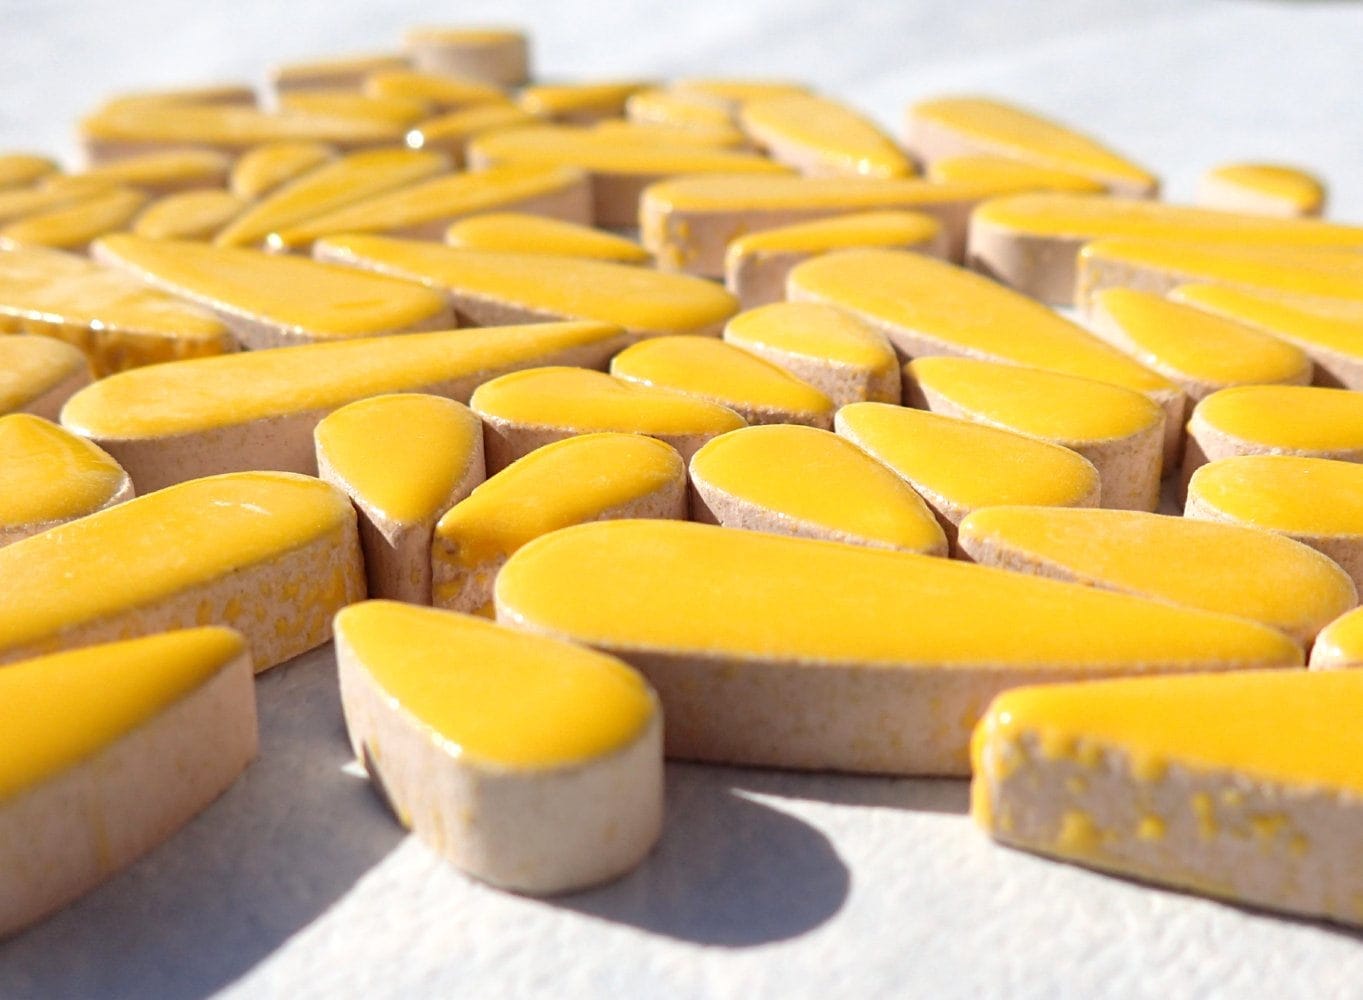 Lemon Yellow Teardrop Mosaic Tiles - 50g Ceramic Drops in Mix of 2 Sizes 1/2" and 3/5"